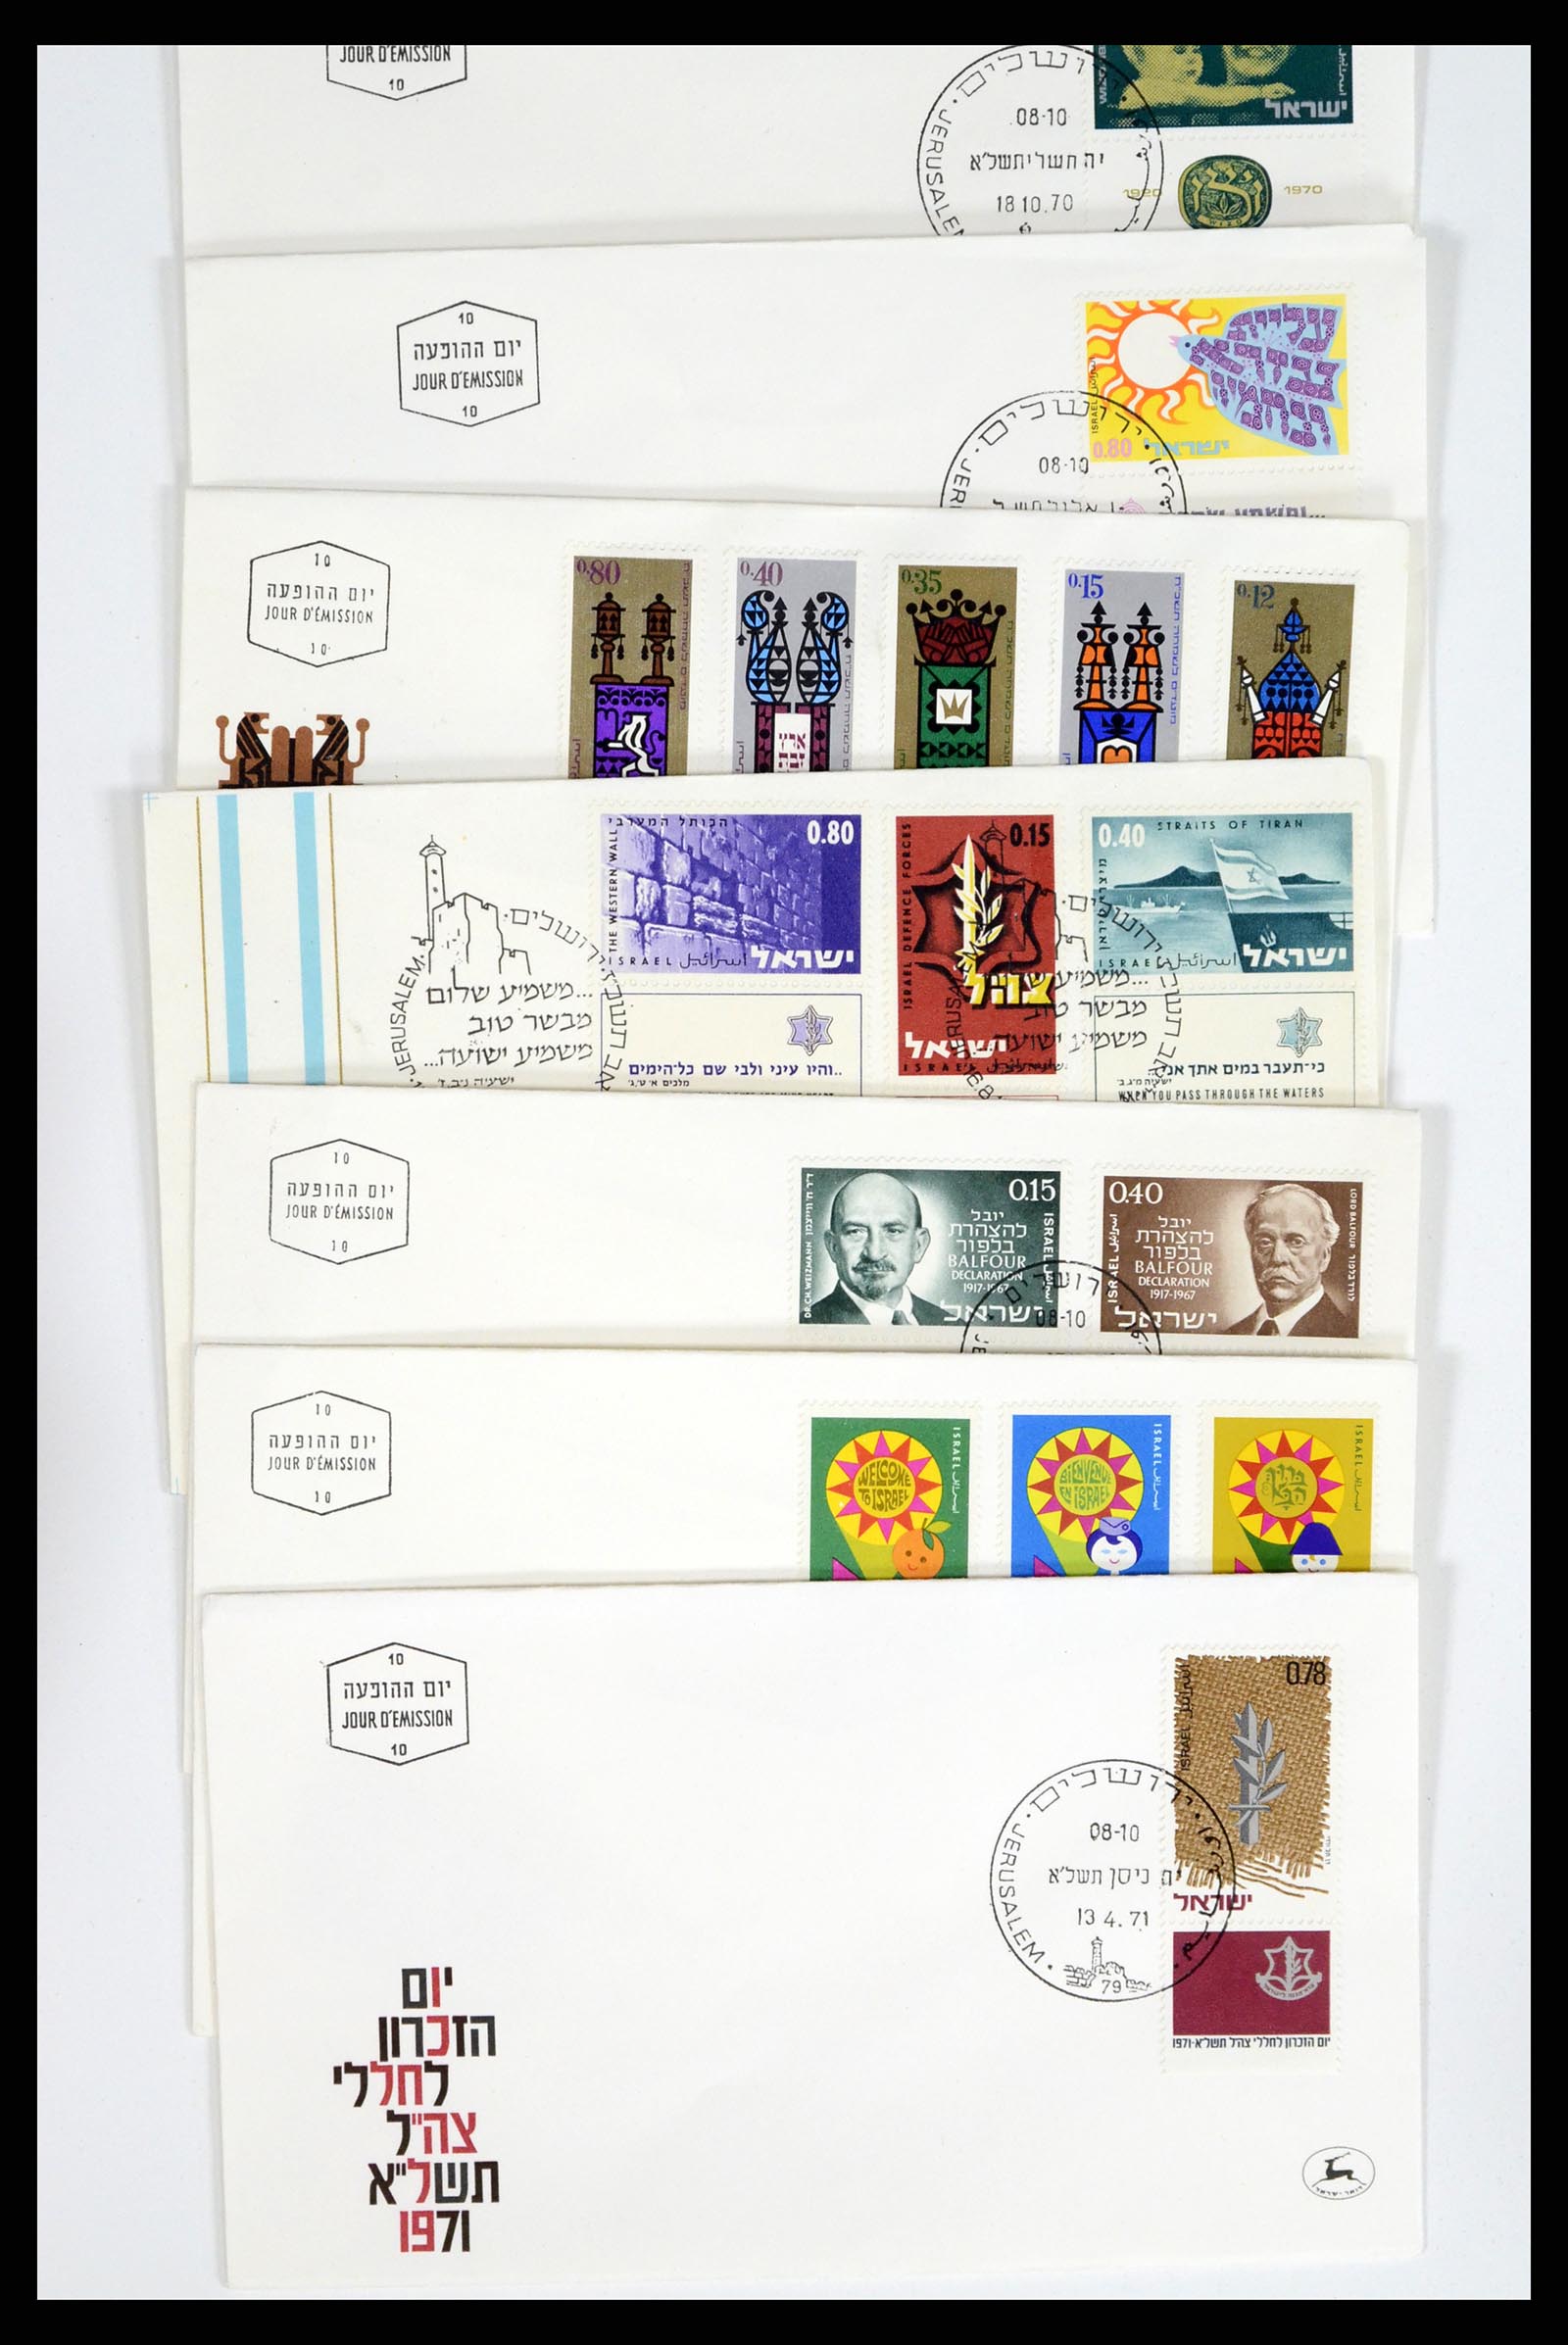 37711 039 - Stamp collection 37711 Israel first day covers 1970-2000.